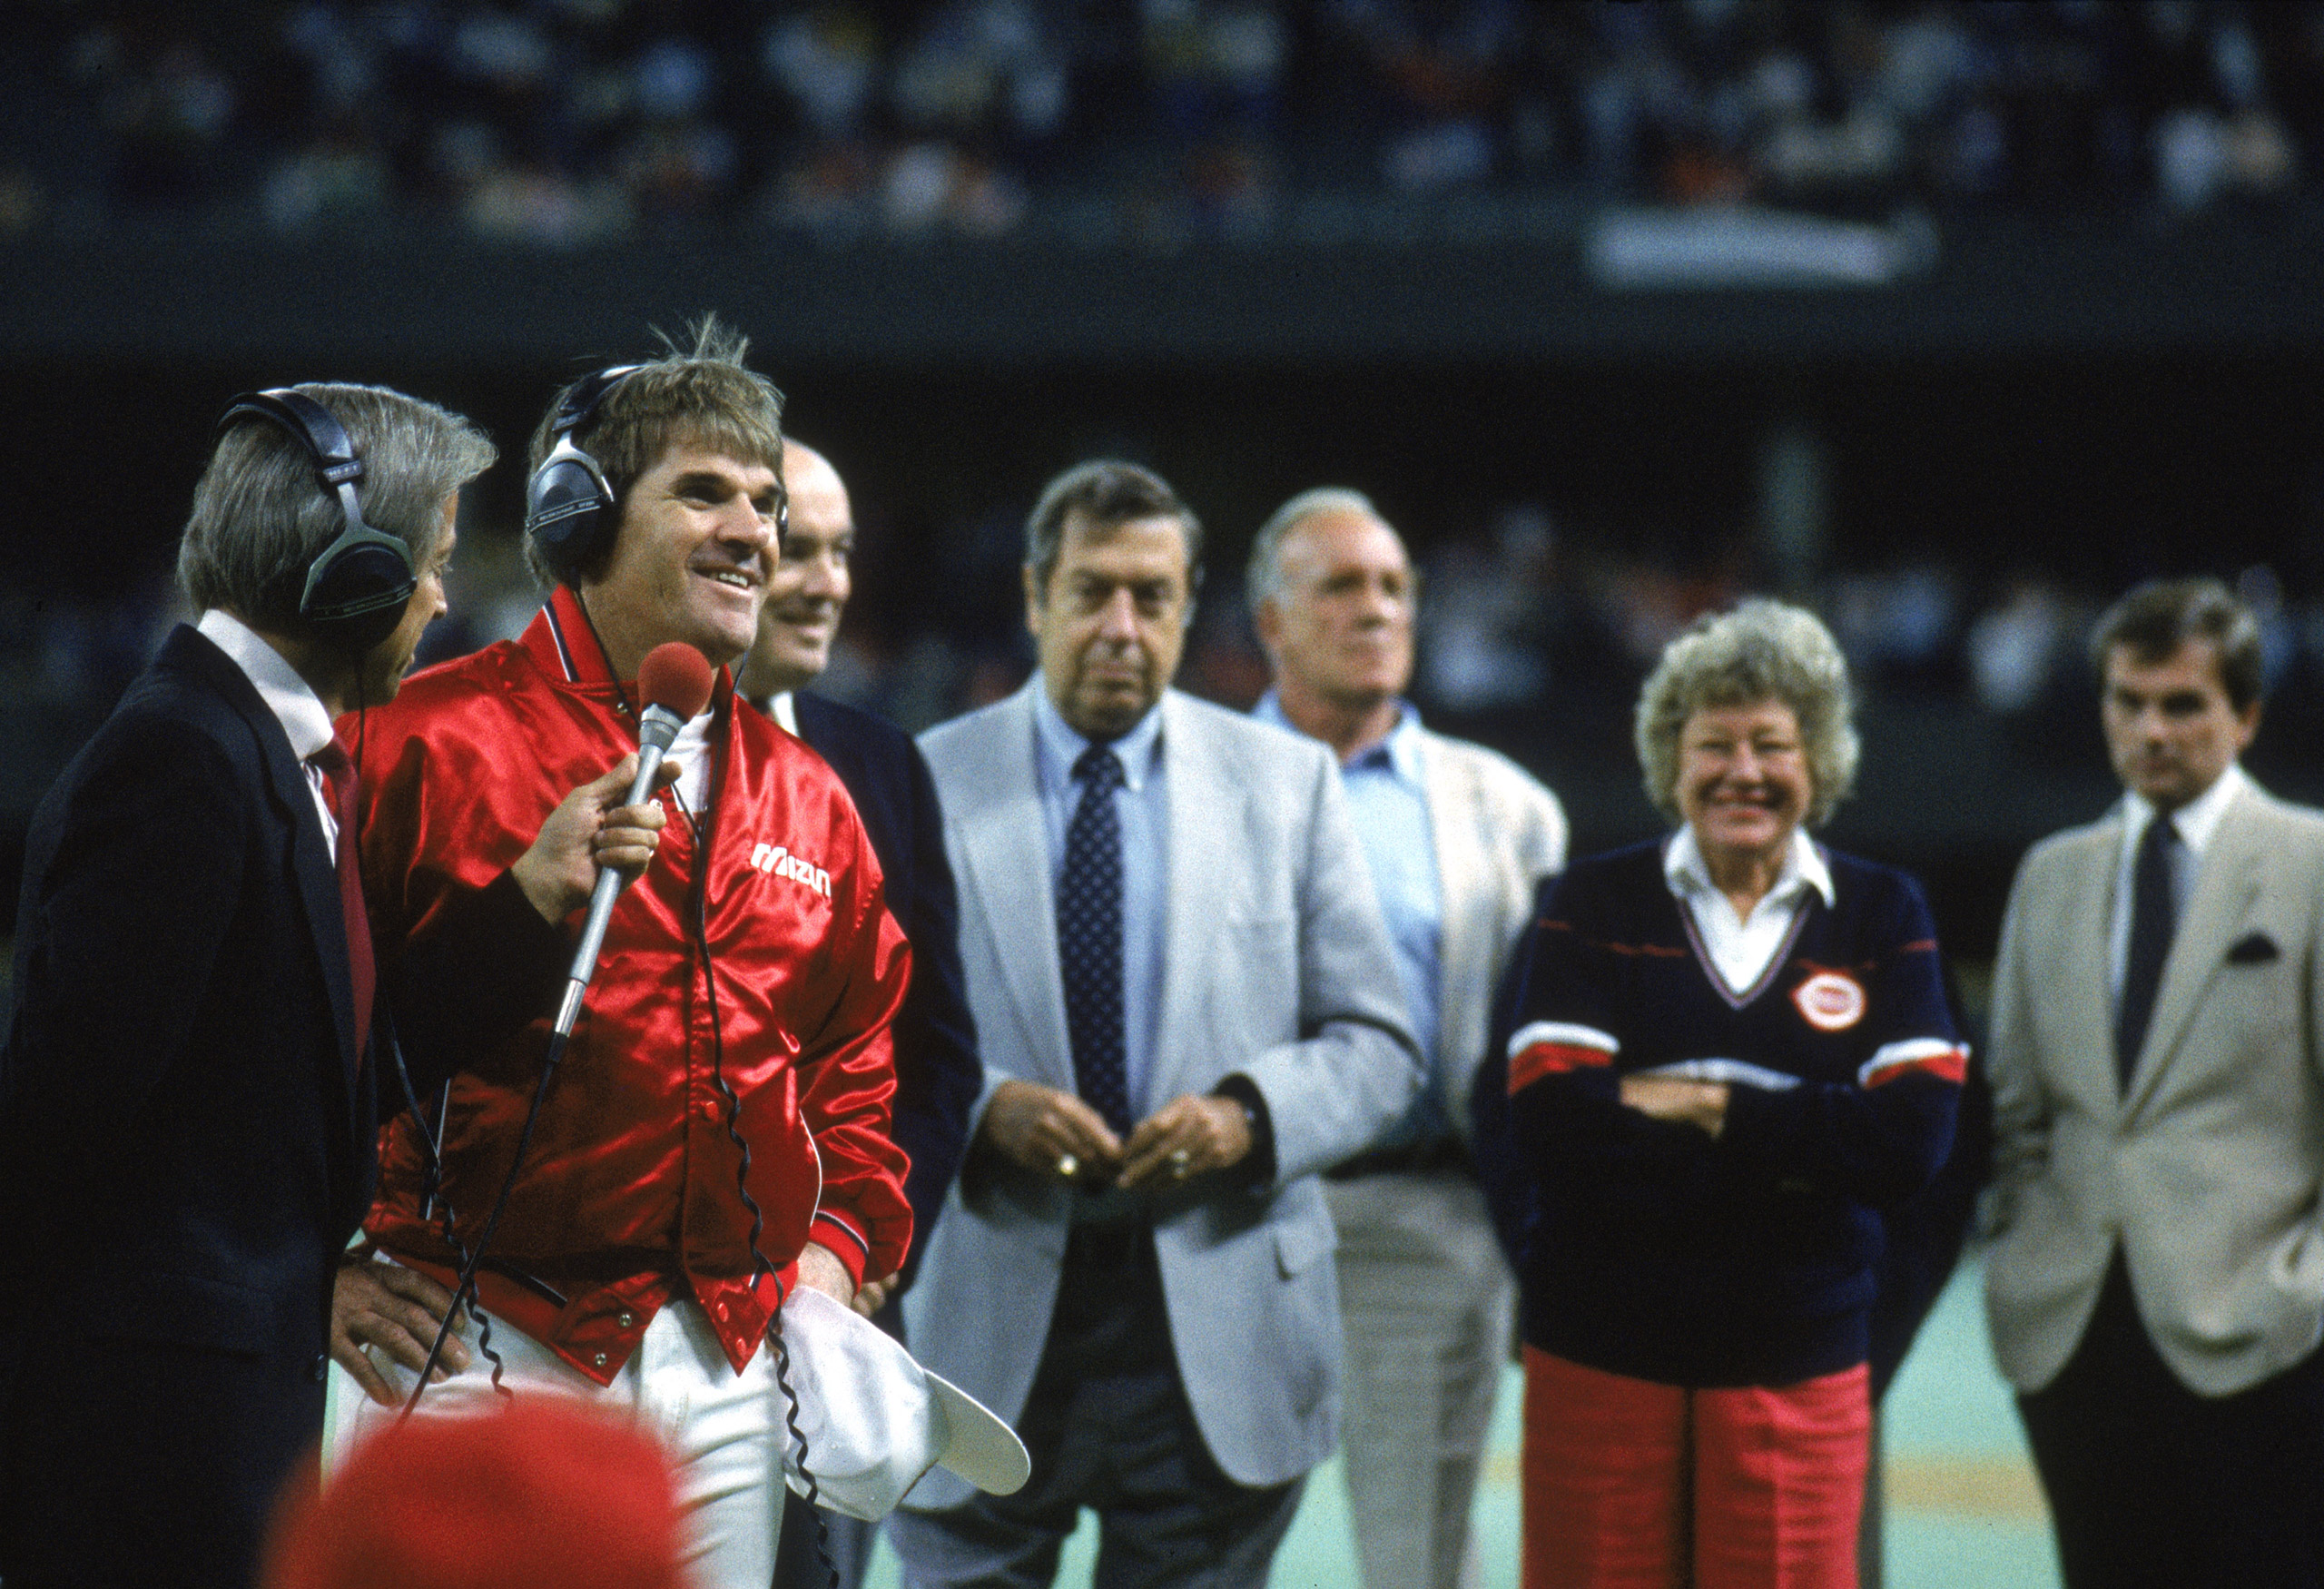 Pete Rose #14 of the Cincinnati Reds stands with an announcer in victory on his 4,192th hit.